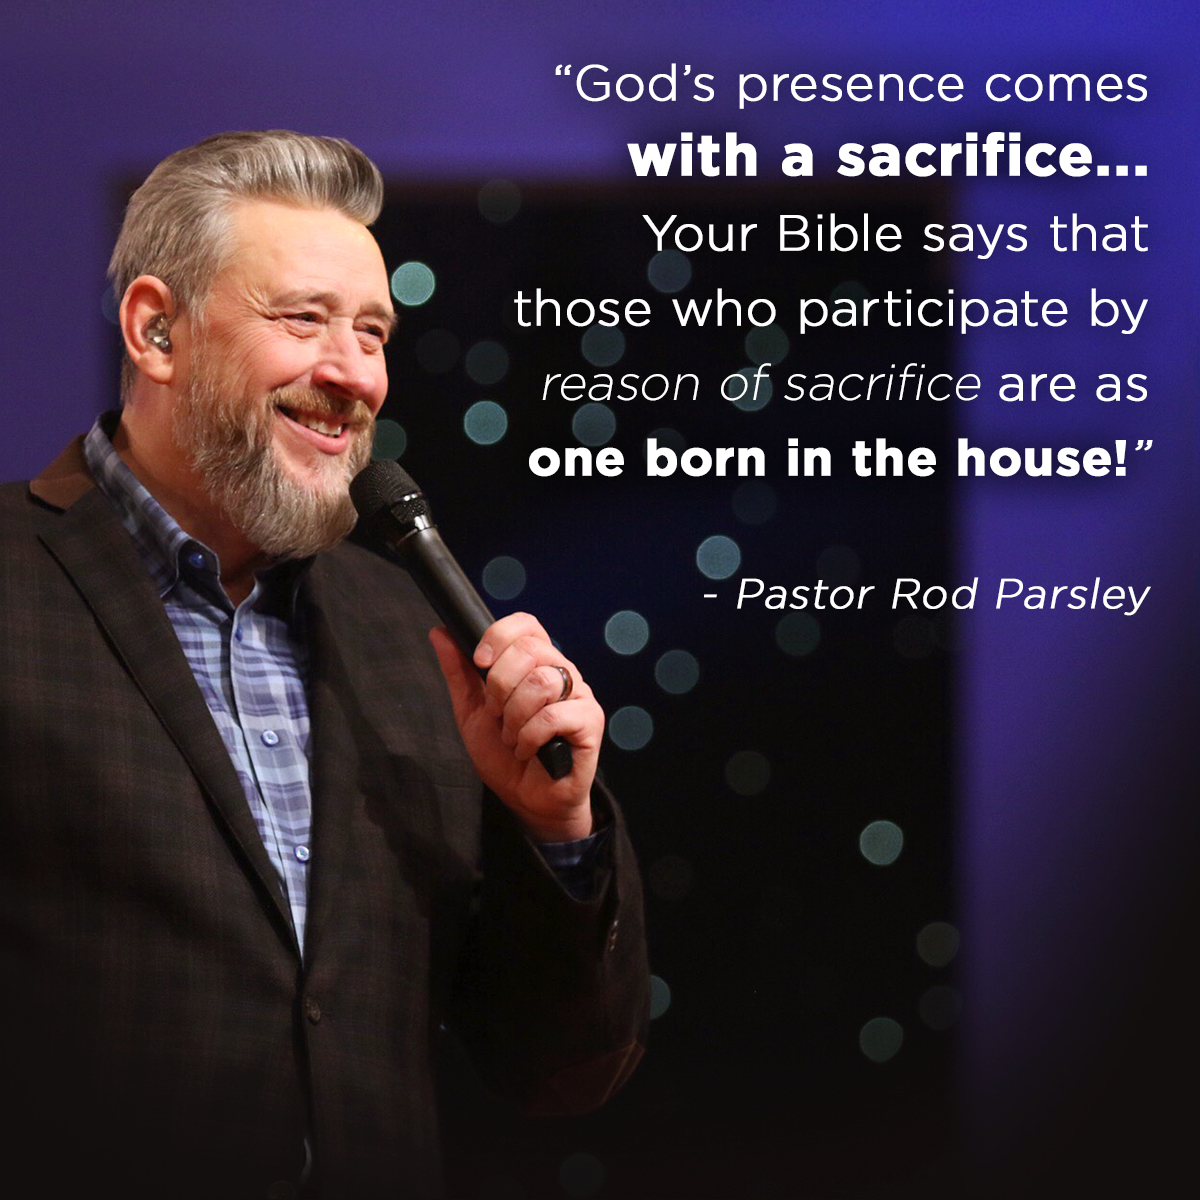 “ God’s presence comes with a sacrifice...Your Bible says that those who participate by reason of sacrifice are as one born in the house!” - Pastor Rod Parsley